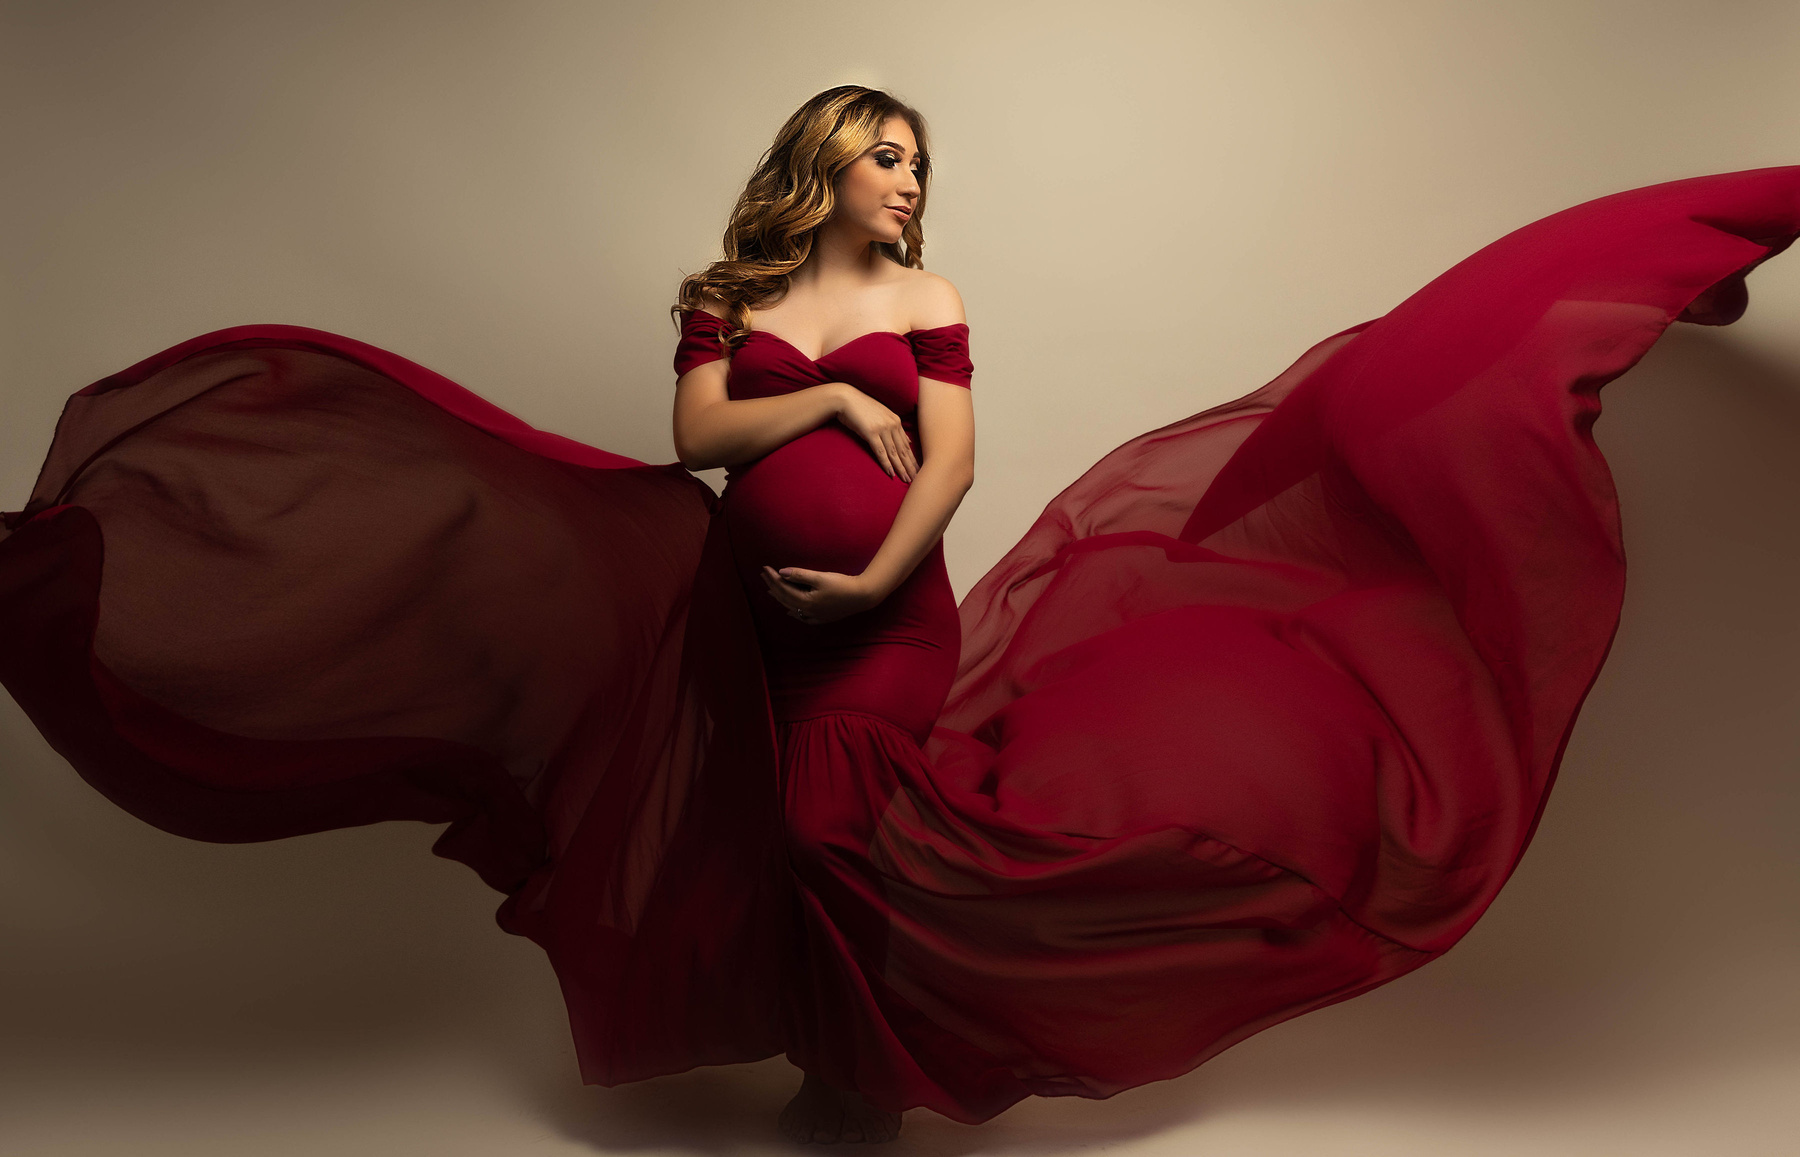 red flowing maternity dress with swoop sleeves and a tulle double tossing train. This pregnancy portrait was taken in the studio by Aly Incardona who was voted the best photographer in the Central Valley modesto California 